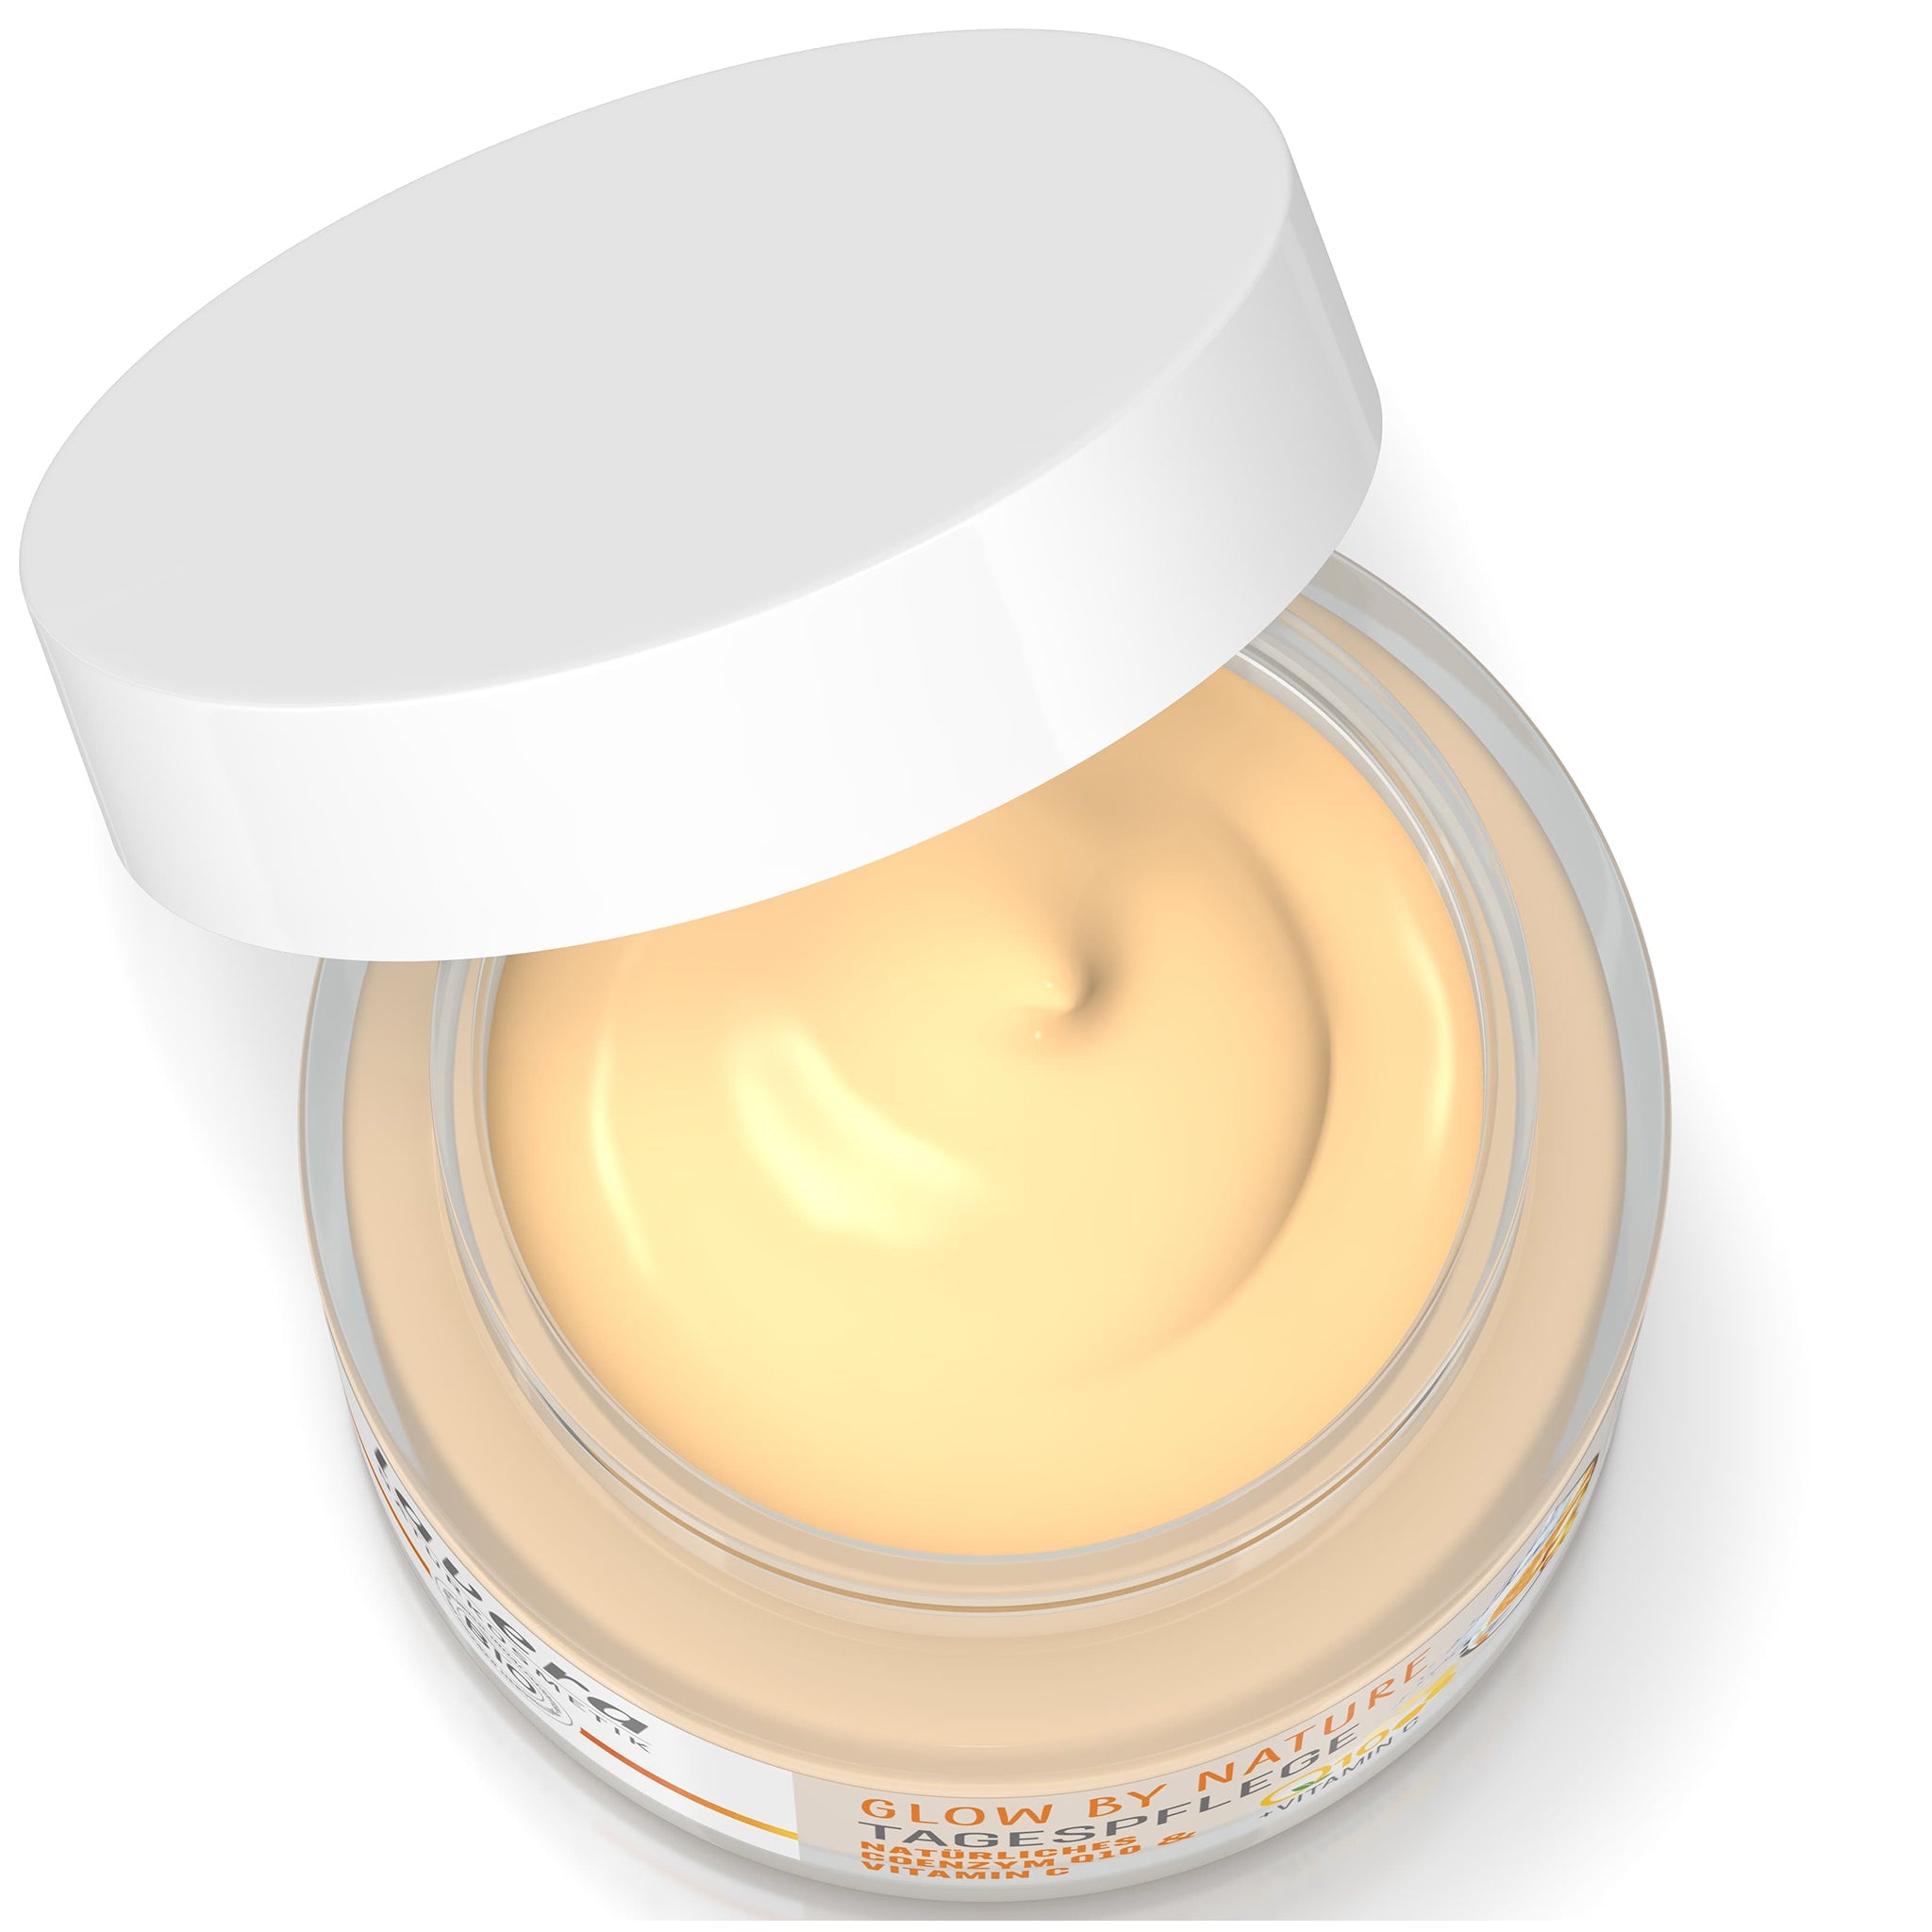 NEW Glow by Nature Day Cream - mypure.co.uk